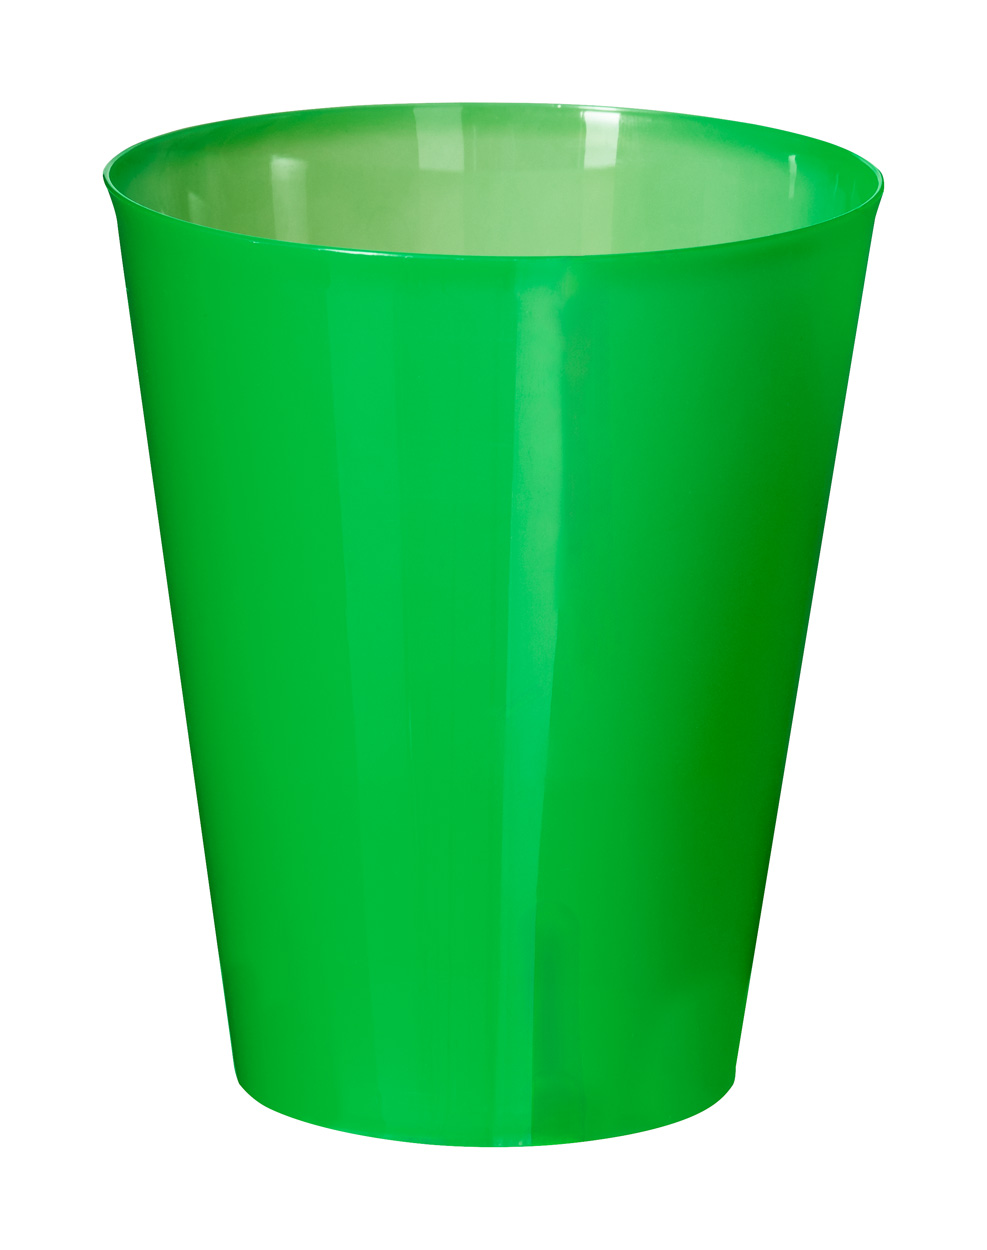 Colorbert reusable cup for events - green